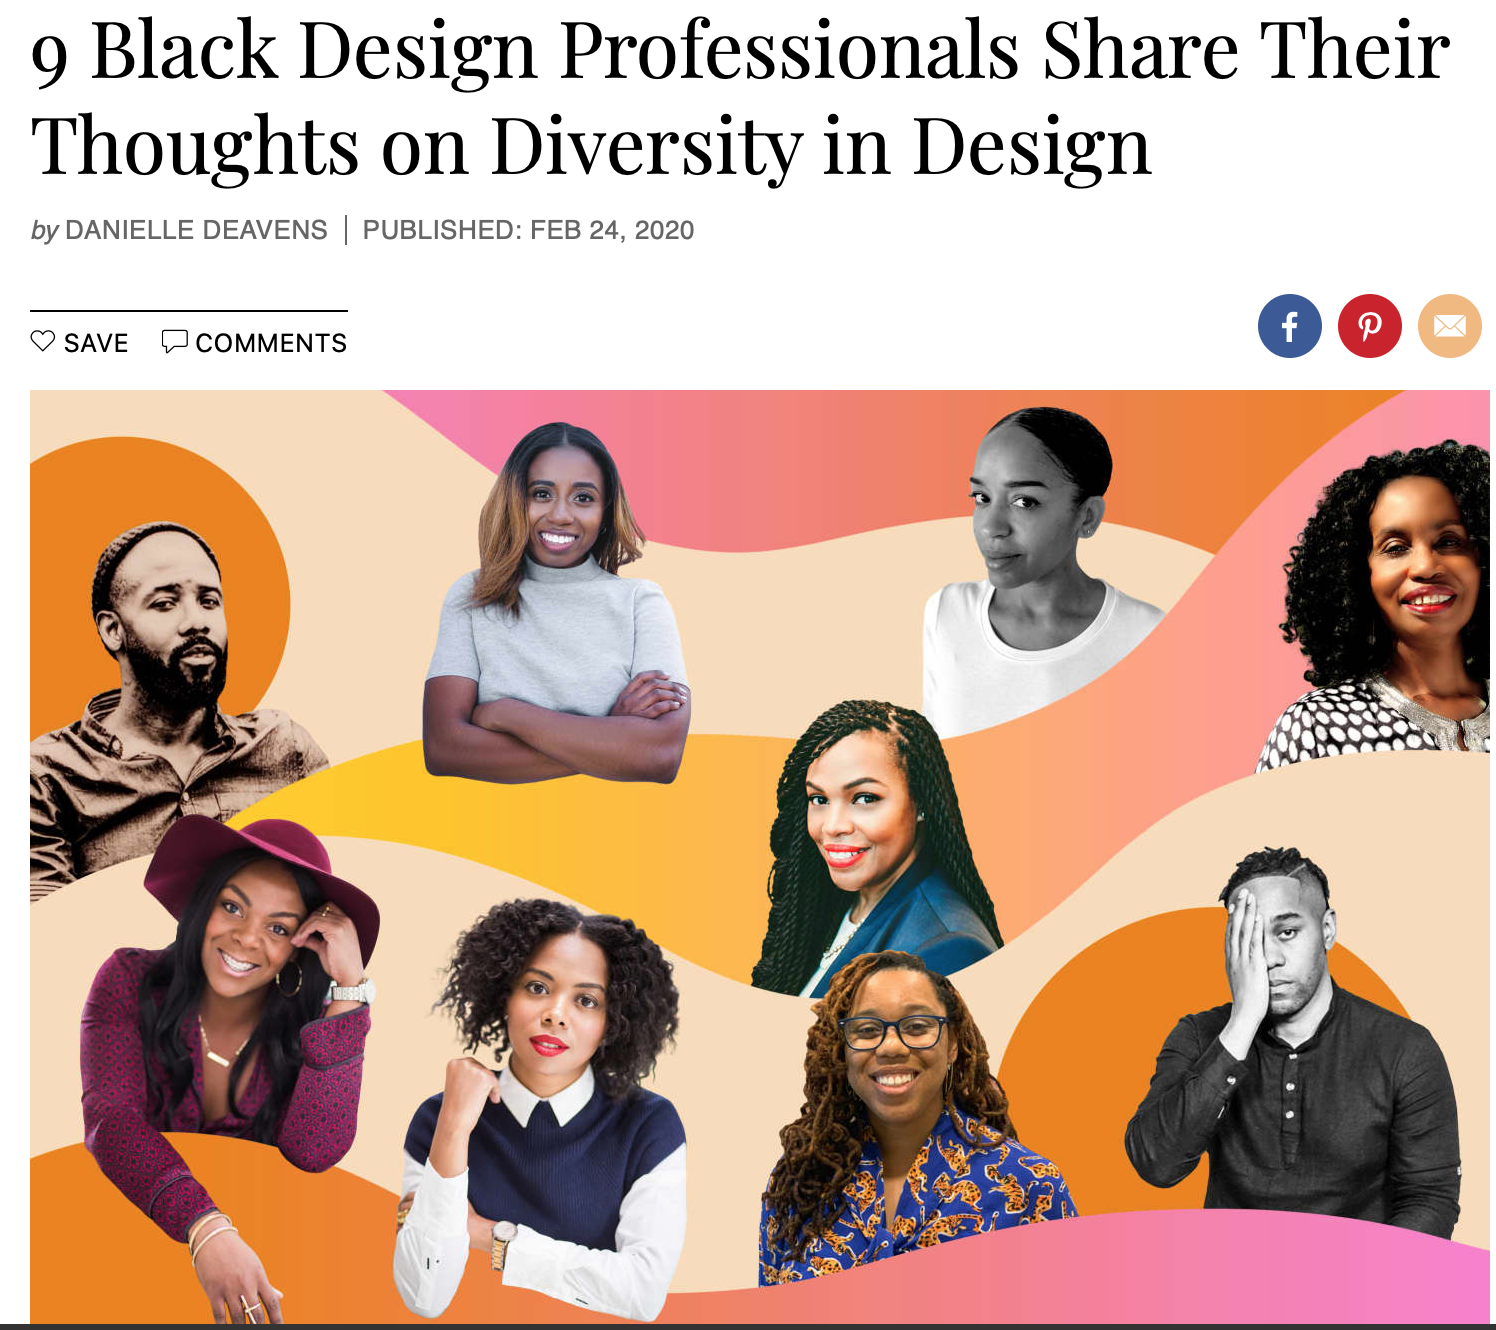 Apartment Theraphy Feb20 - 9 Black Designers.png